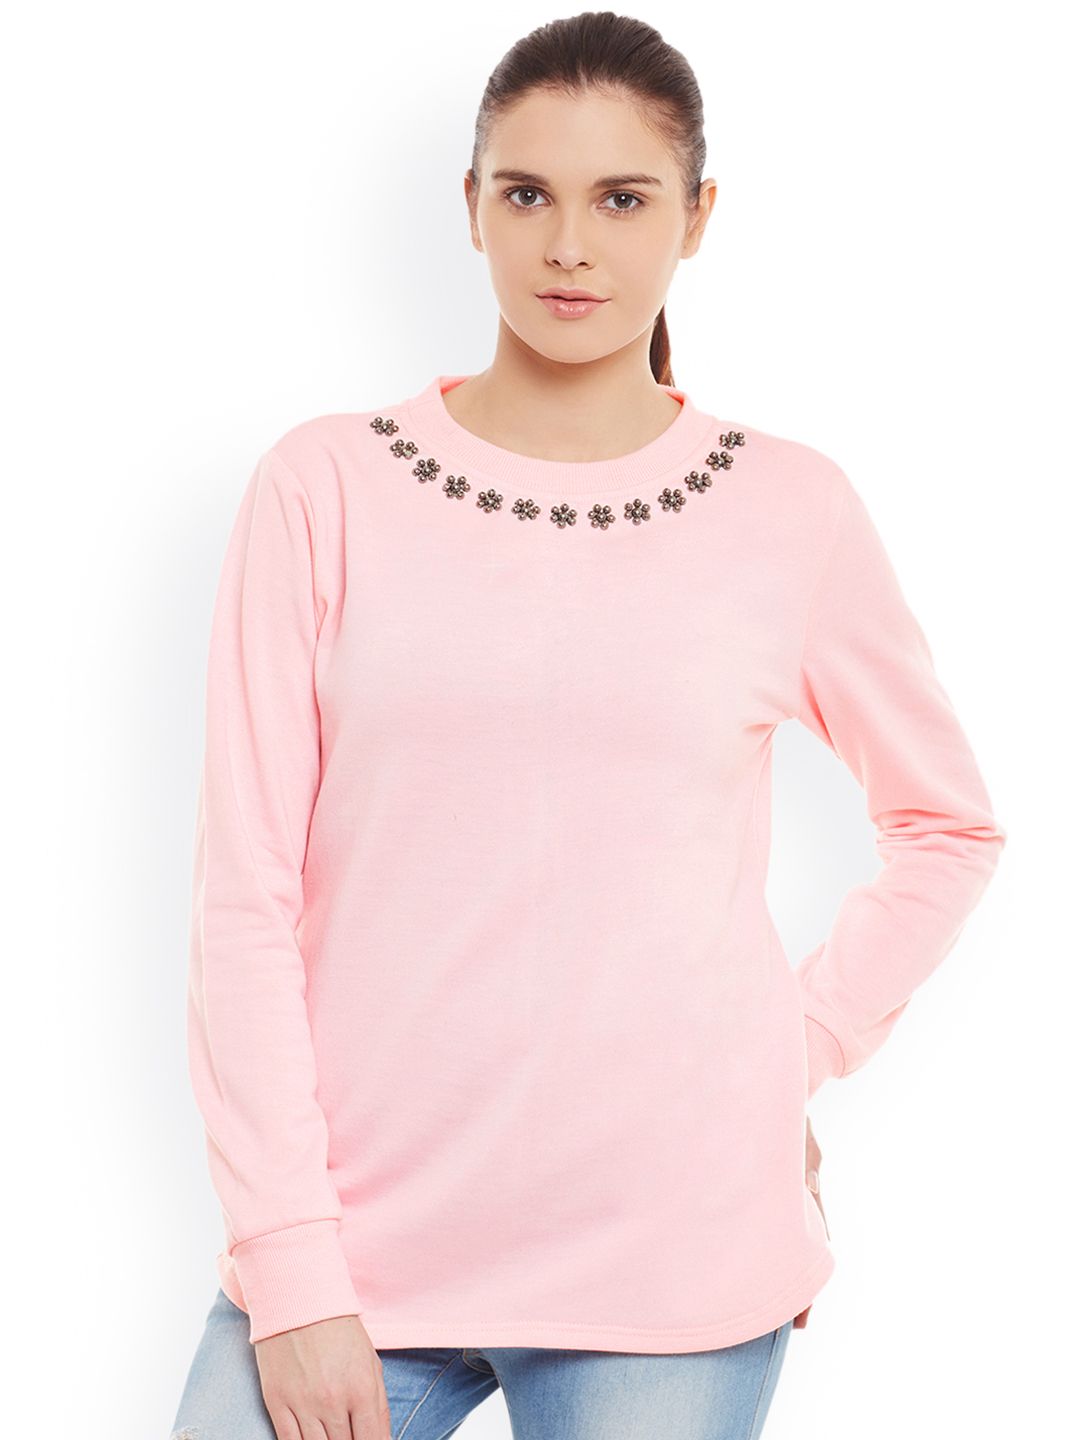 Belle Fille Pink Sweatshirt with Embellished Detail Price in India